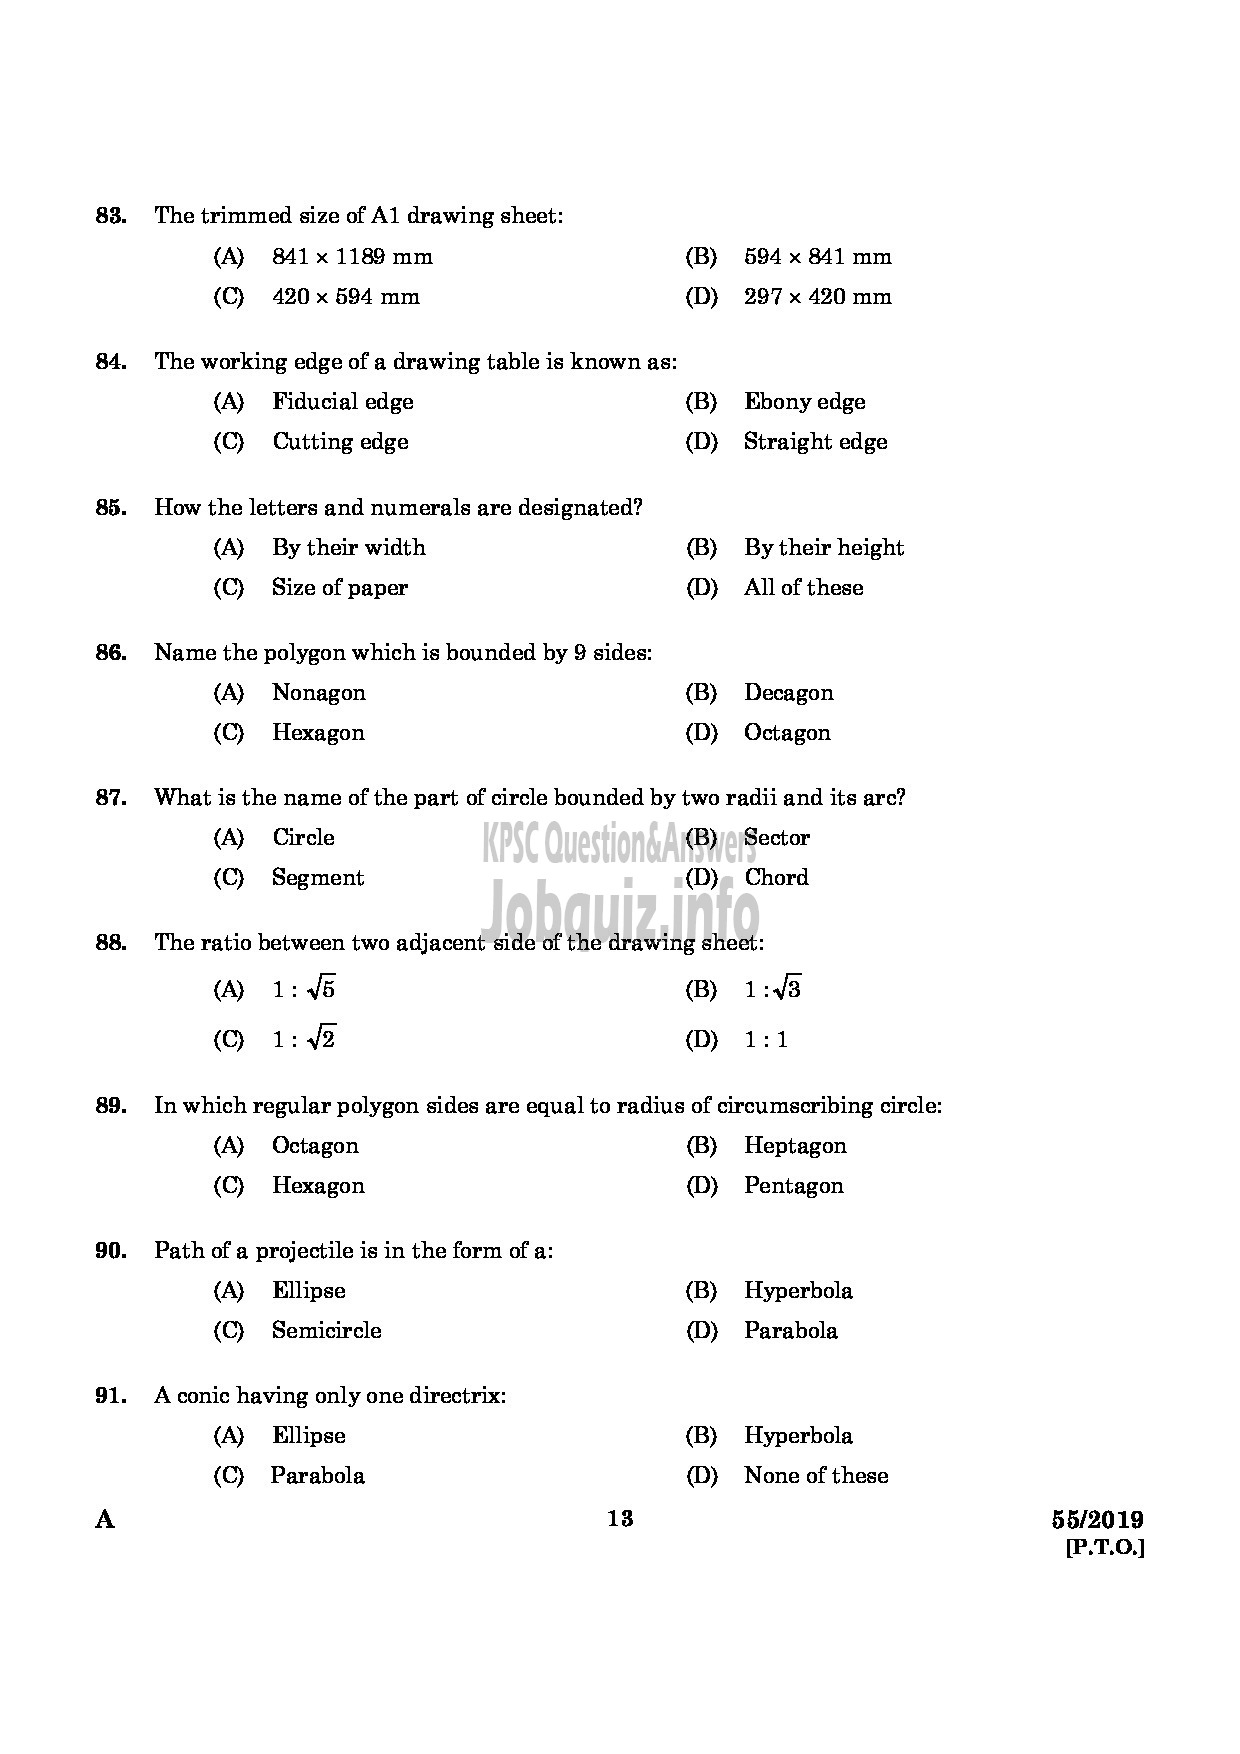 Kerala PSC Question Paper - Overseer / Draftsman (Mechanical) Gr II (Special Recruitment From Among SC/ST) English -11